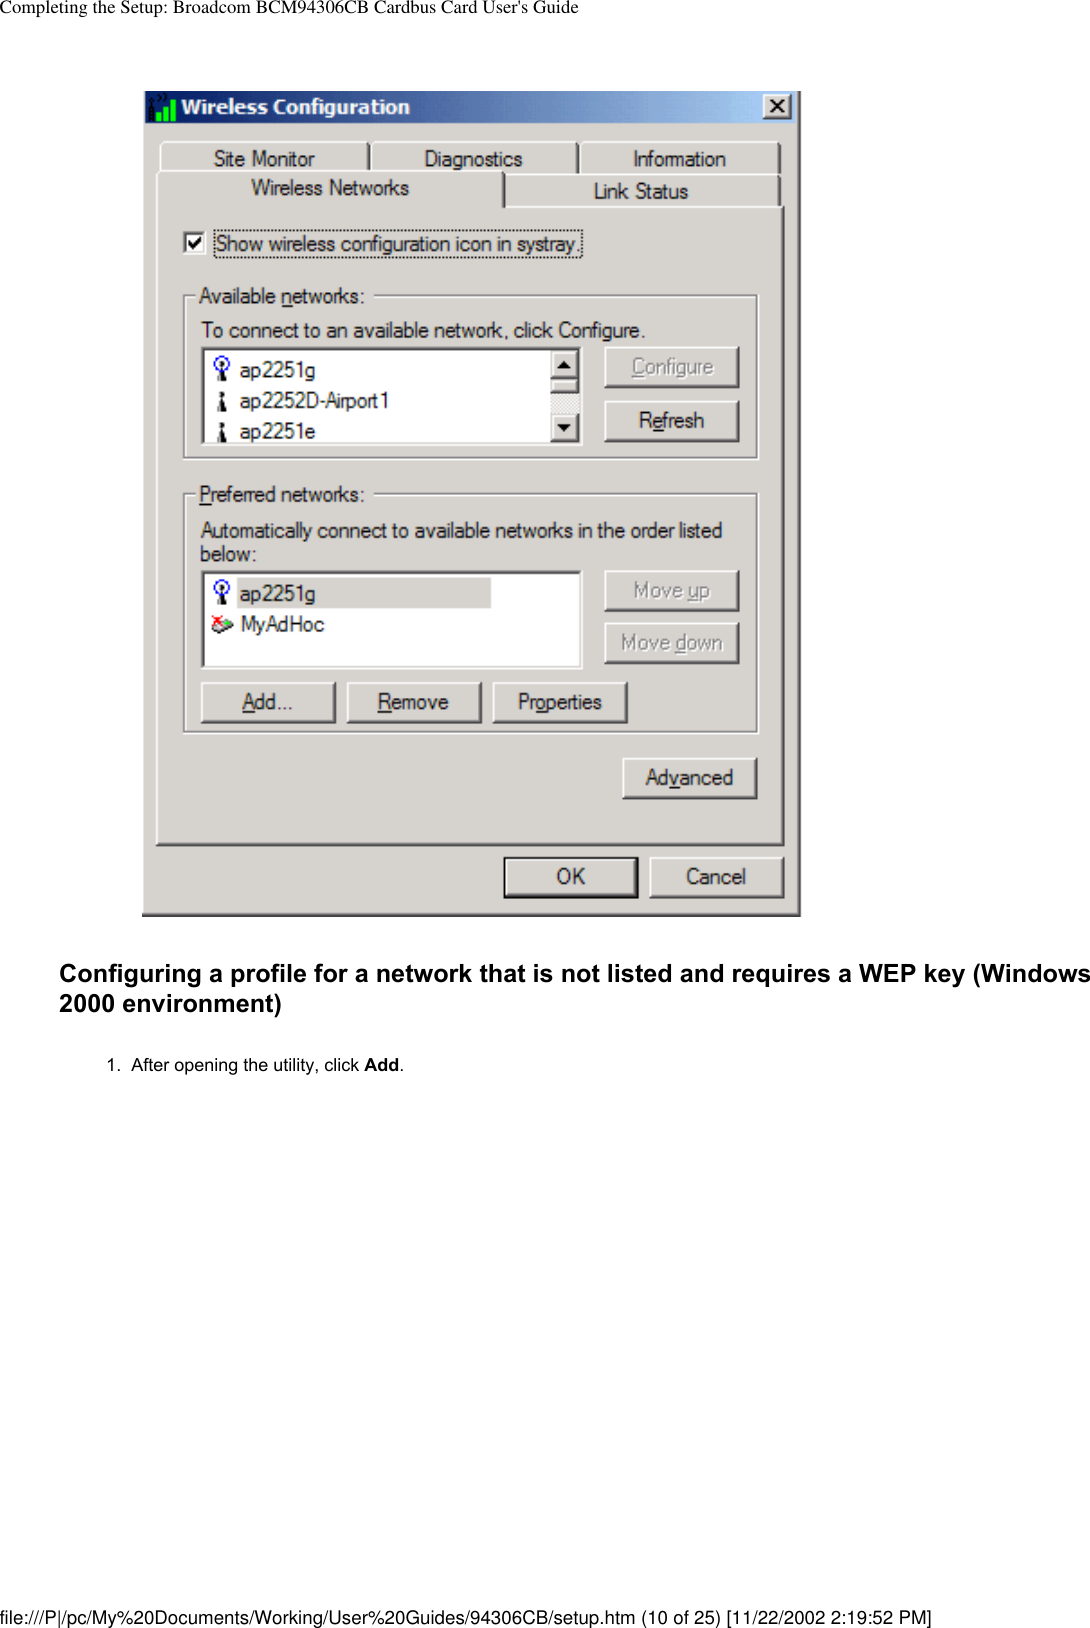 Completing the Setup: Broadcom BCM94306CB Cardbus Card User&apos;s GuideConfiguring a profile for a network that is not listed and requires a WEP key (Windows 2000 environment)1.  After opening the utility, click Add. file:///P|/pc/My%20Documents/Working/User%20Guides/94306CB/setup.htm (10 of 25) [11/22/2002 2:19:52 PM]